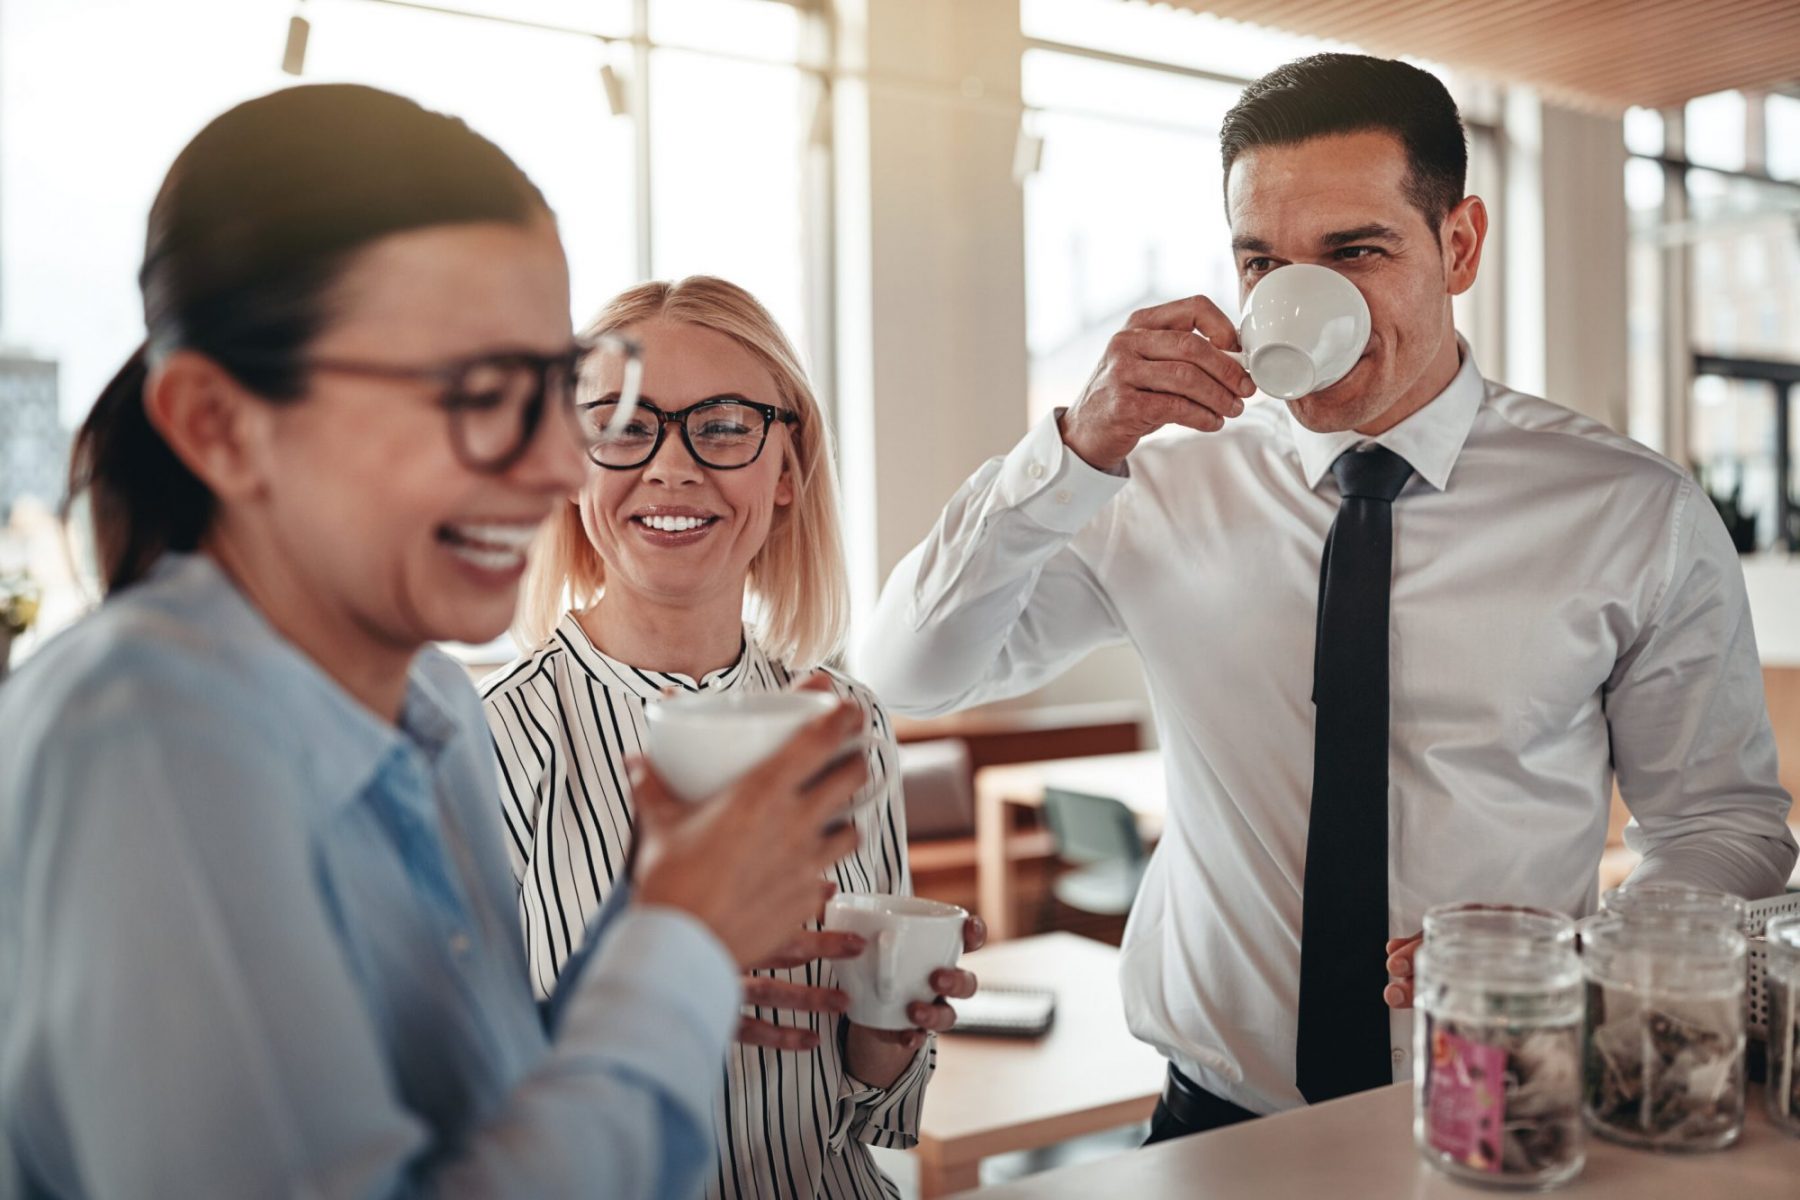 Sacramento Office Coffee Services | Workplace Culture | Employee Benefit